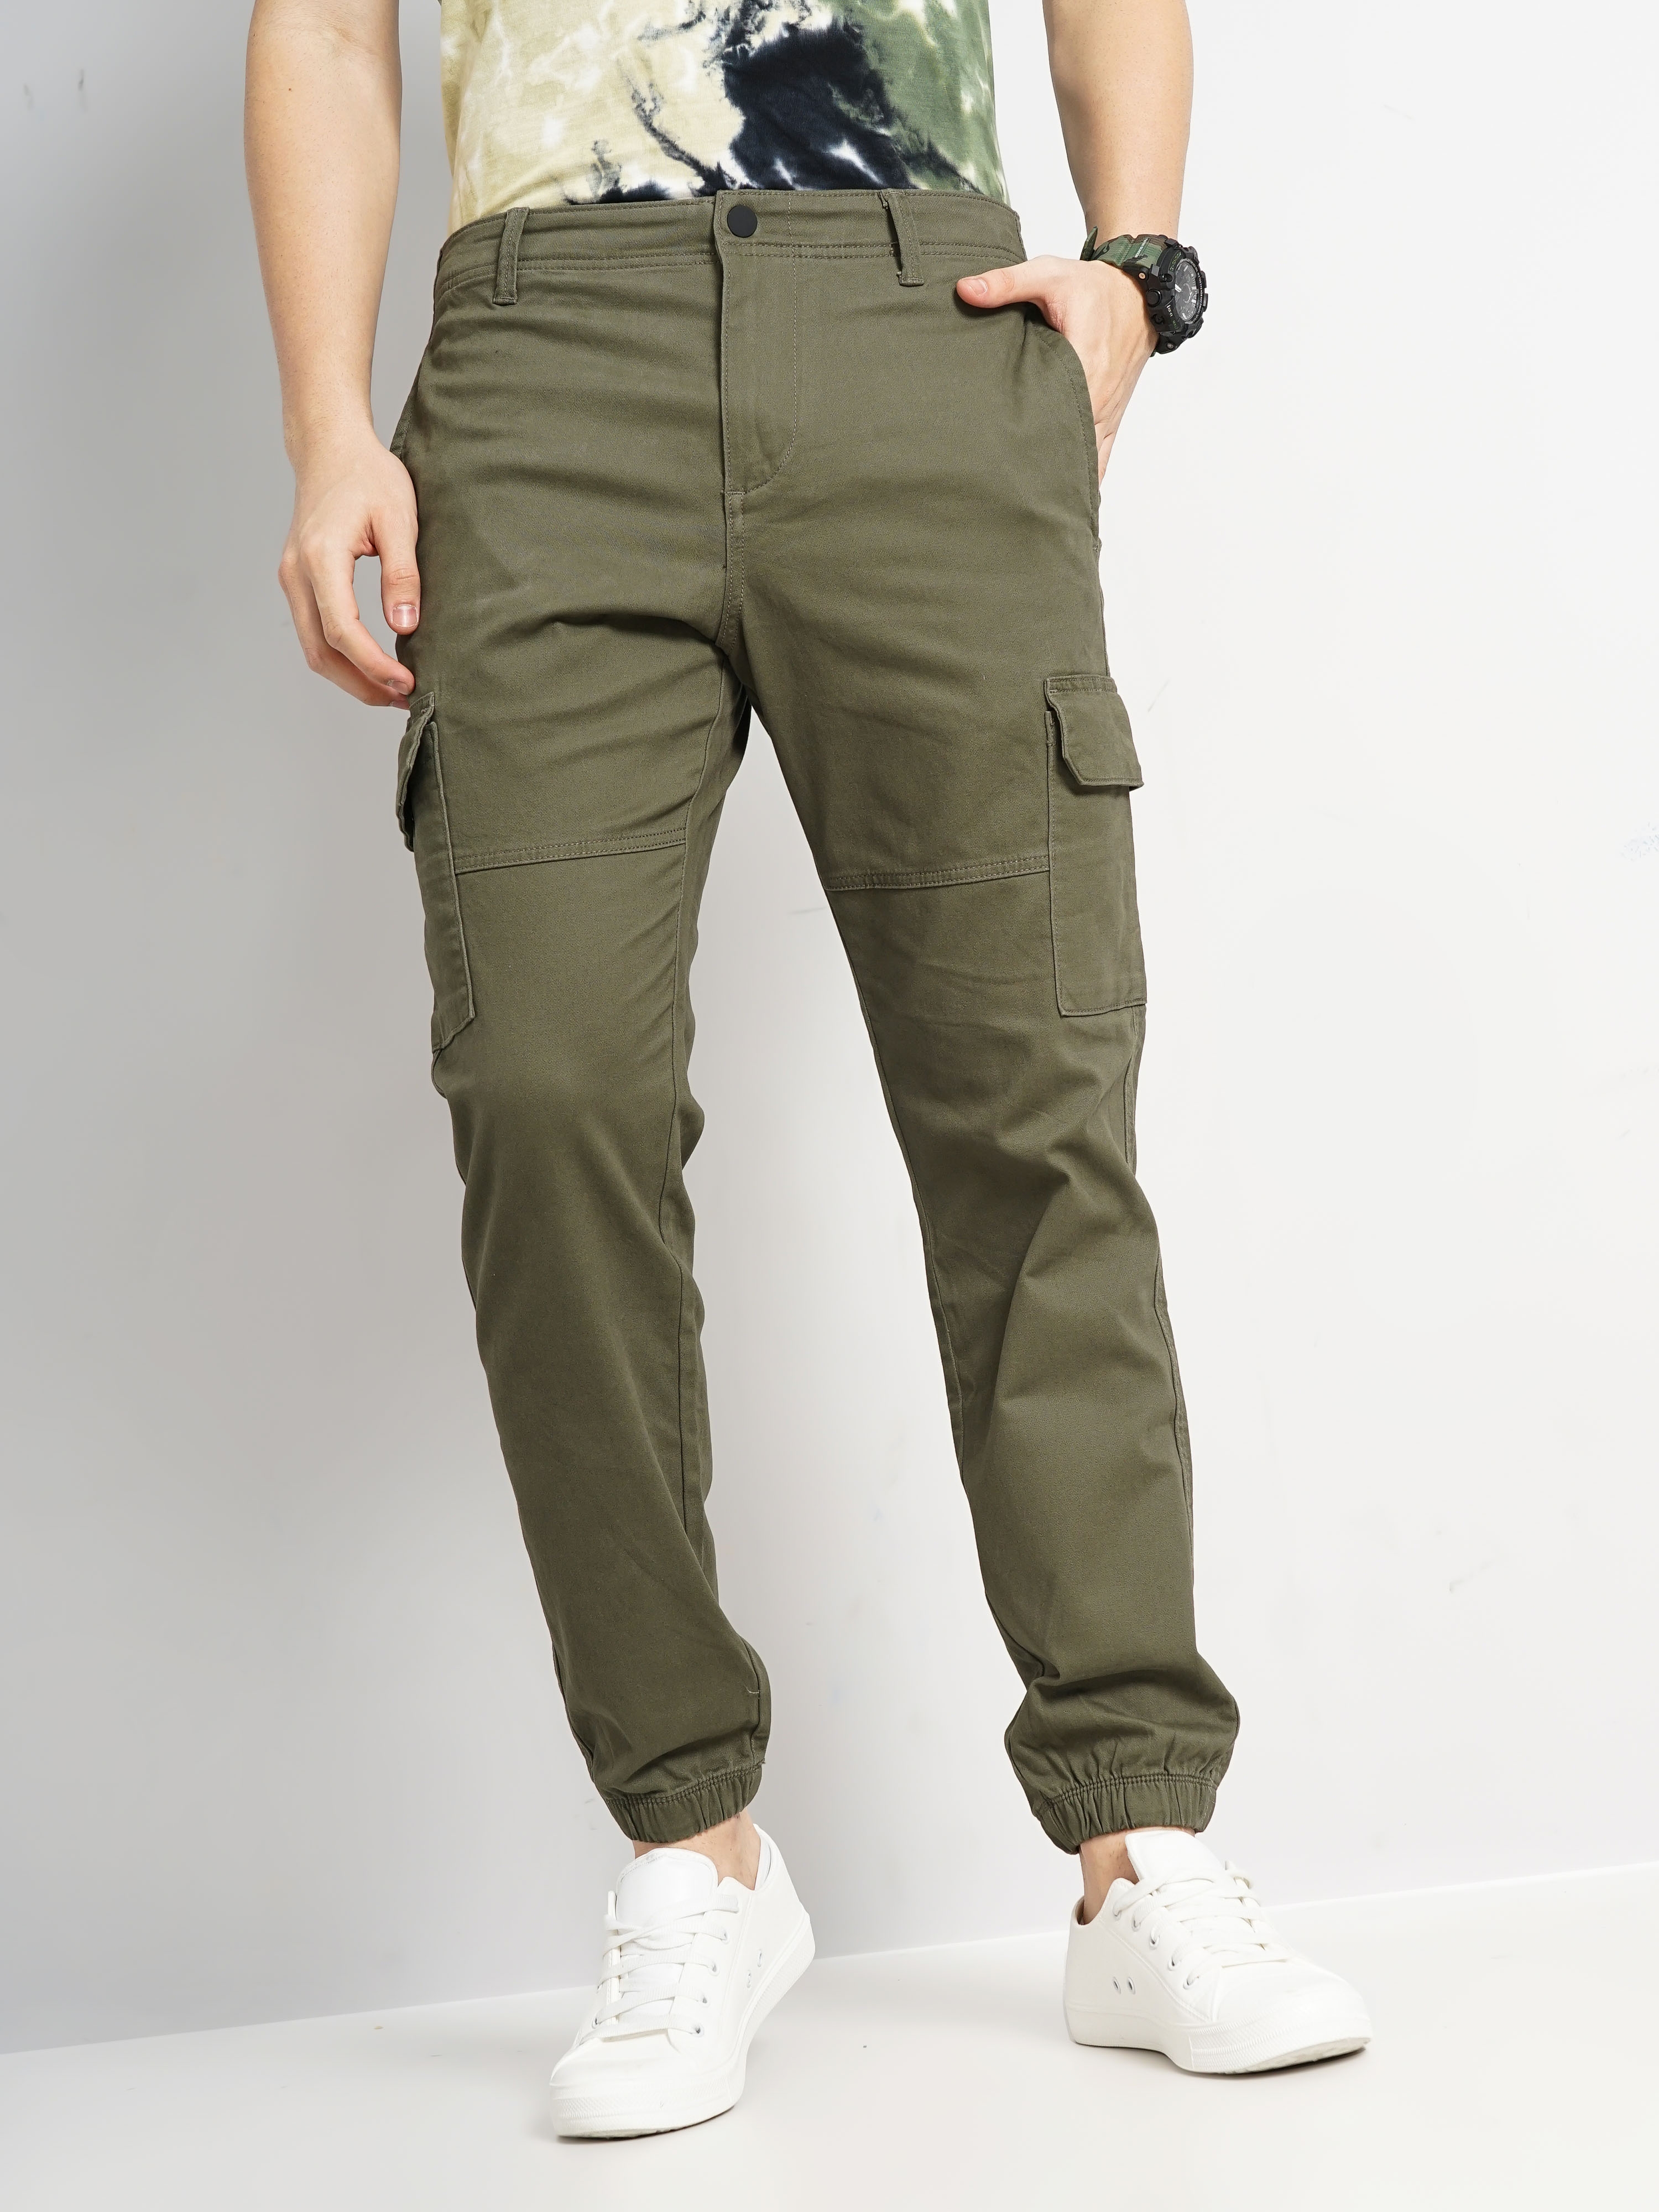 Buy RATHORE ENTERPRISES Lycra Blend Casual Trousers for Men | Regular Fit Mens  Trousers | Trousers for Wedding, Occassions and Parties | Comfortable Mens  Trousers (32, Green Dark Grey) at Amazon.in